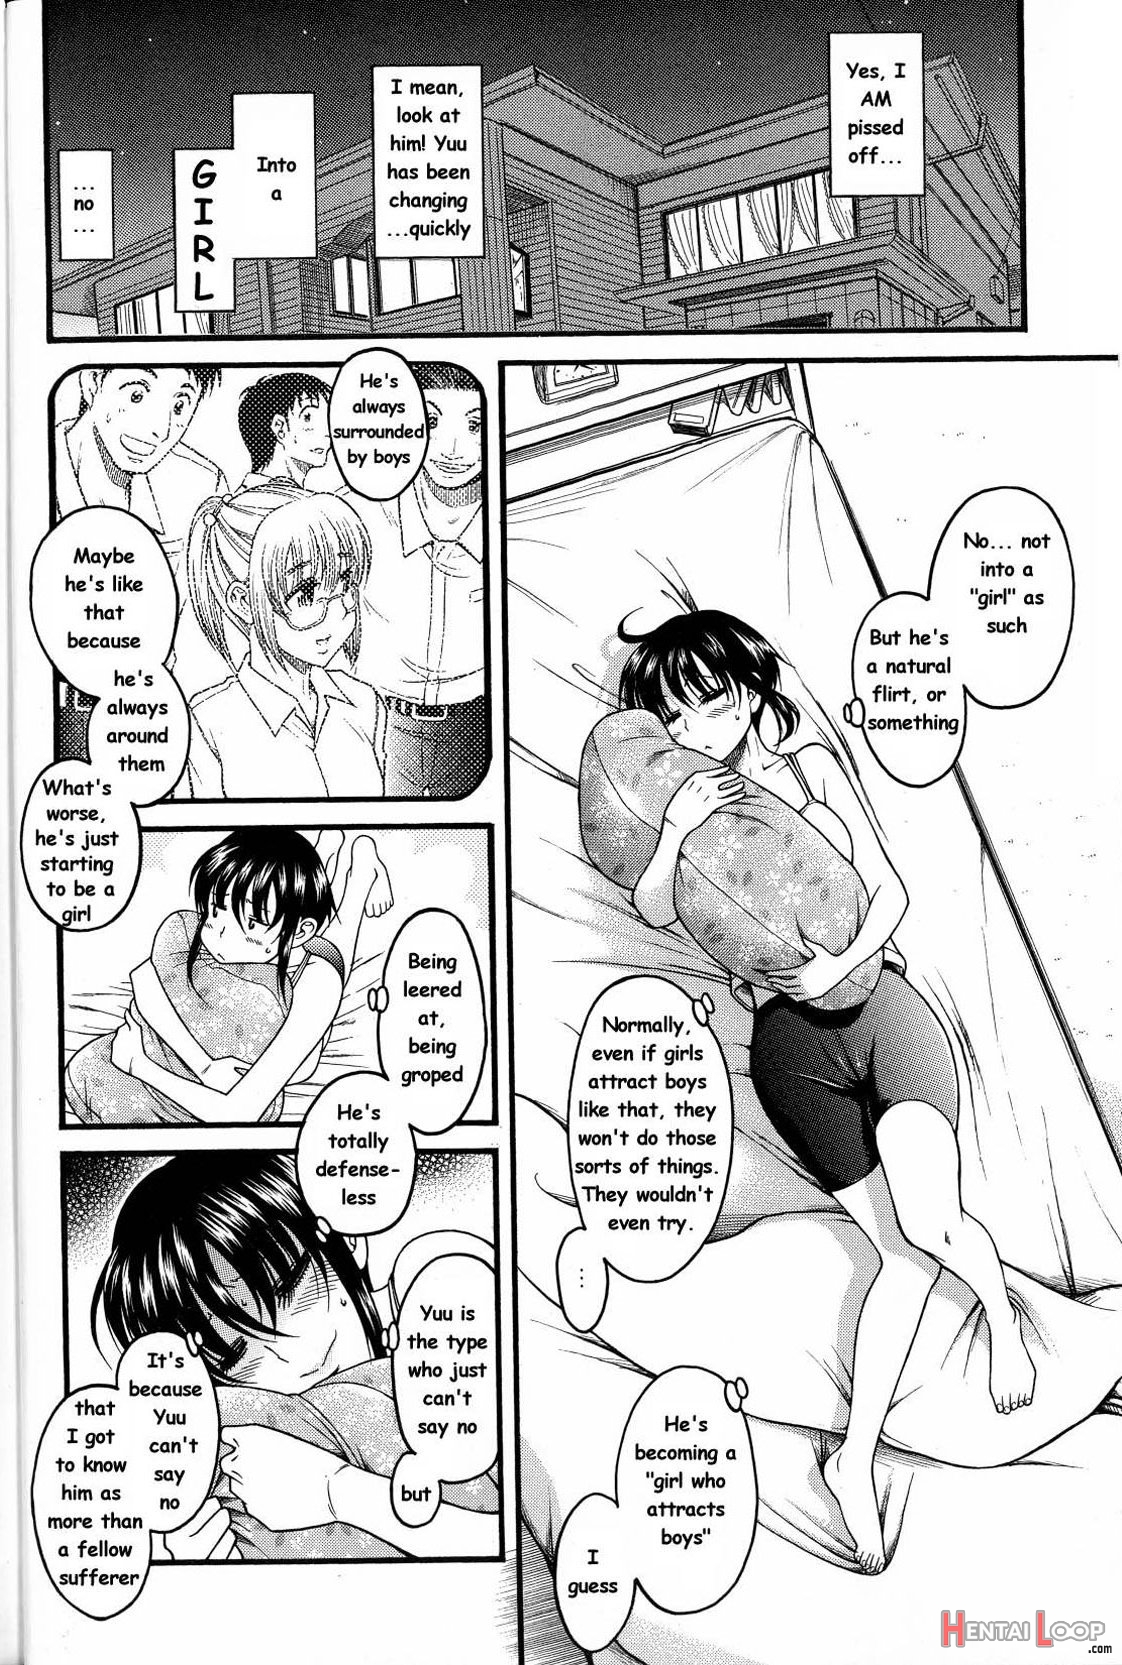 Boy Meets Girl, Girl Meets Boy 2- Single Page Version page 10